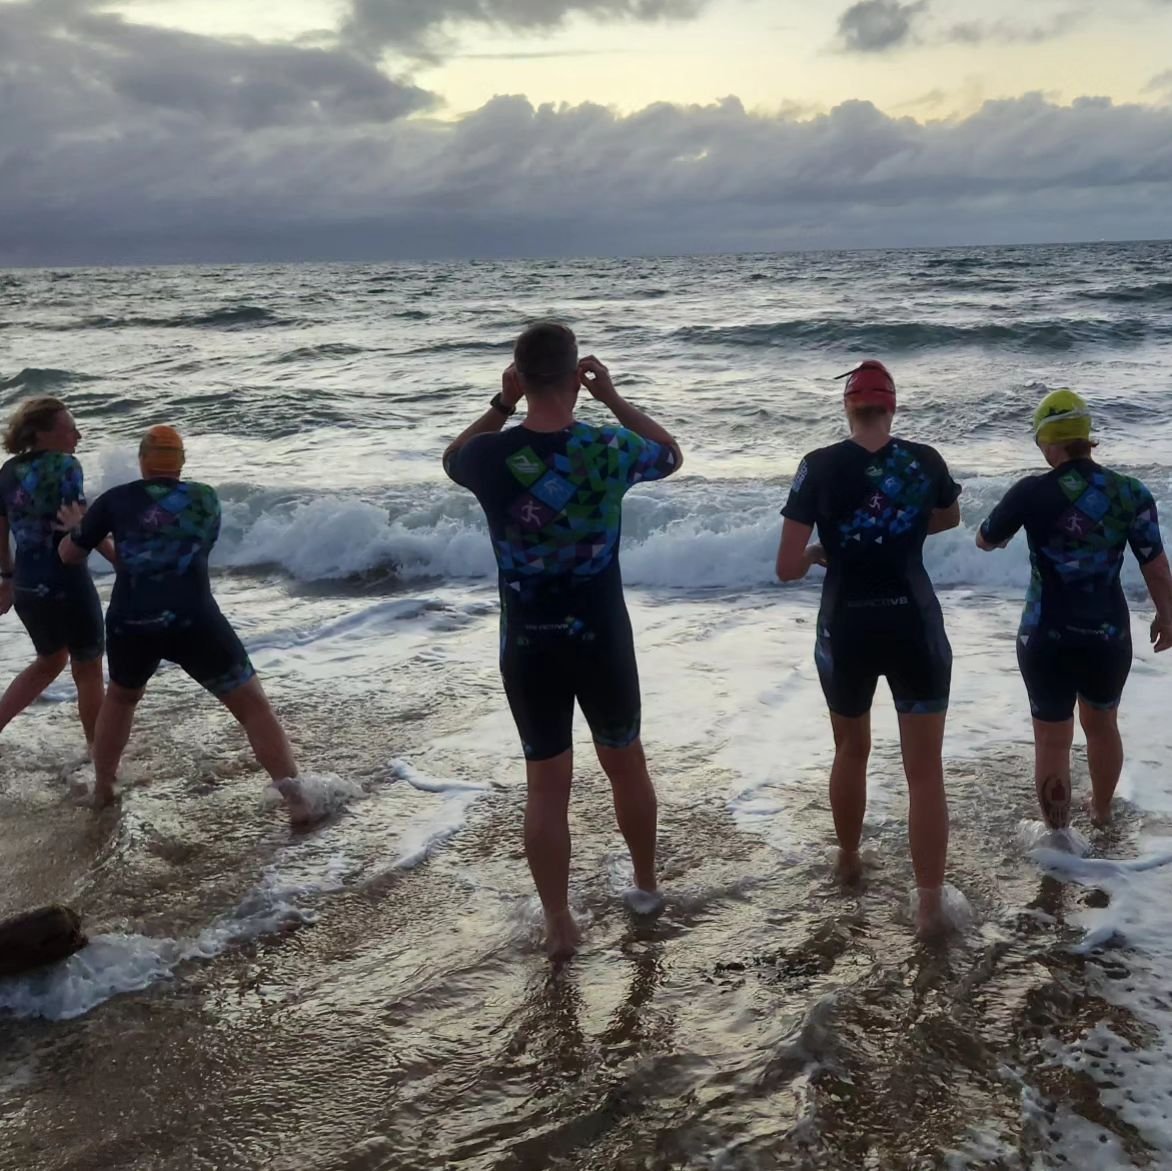 V8 Bricks! 
Time is running out for our Wednesday Ocean Swims!  We shortened the swim distance to practice entry and exits.  No matter the conditions (within reason) it's important to get in and experience it.  You never know what race day will throw